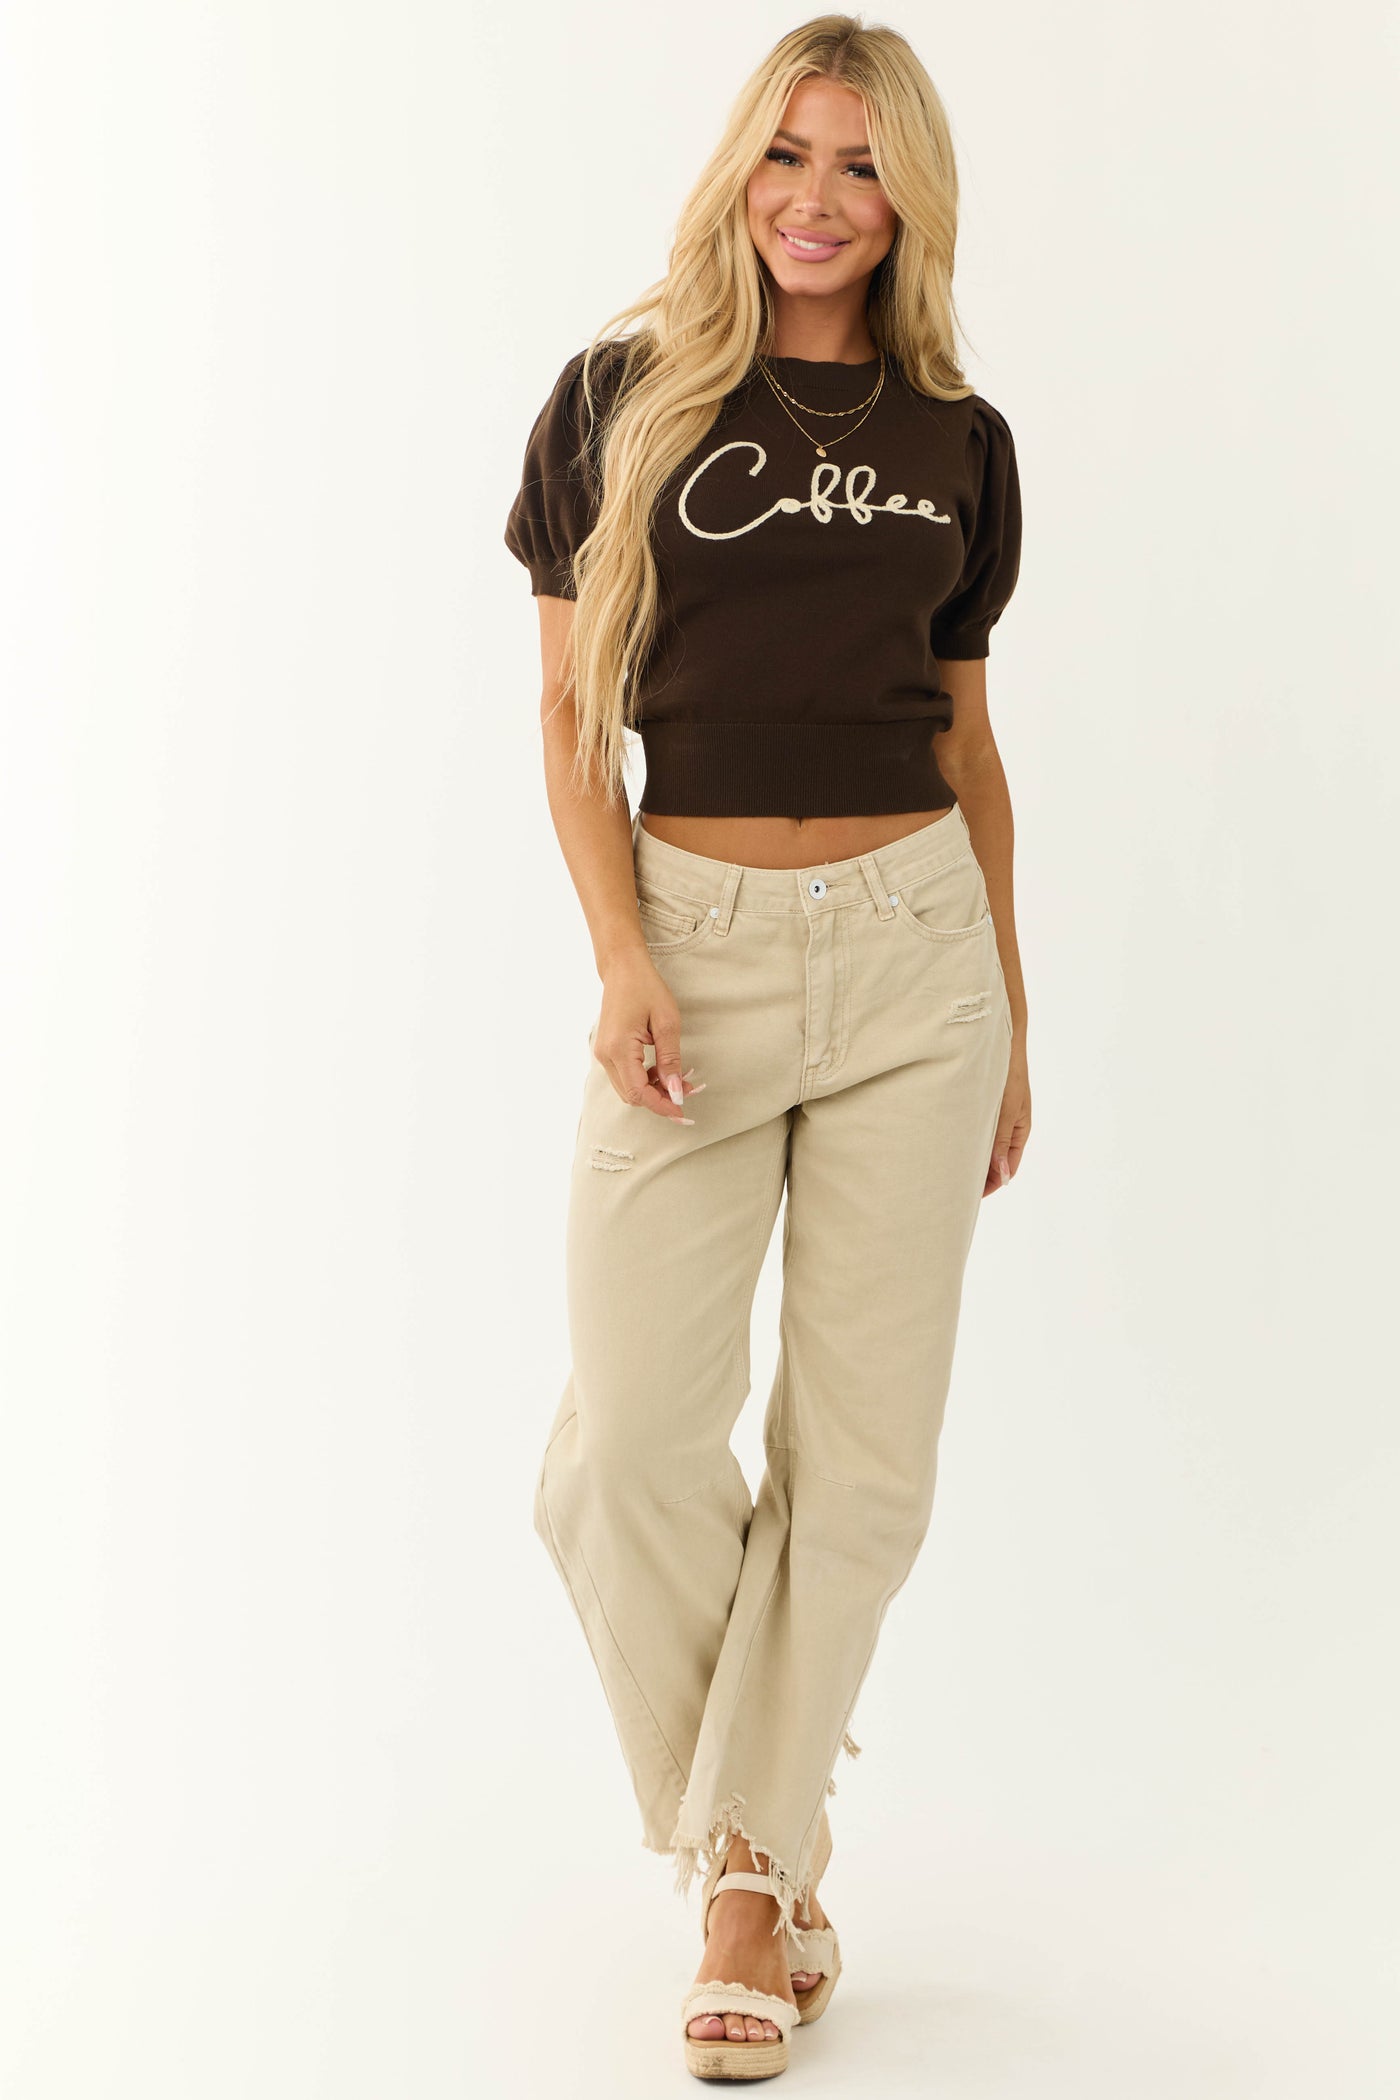 Cocoa 'Coffee' Embroidered Short Sleeve Sweater